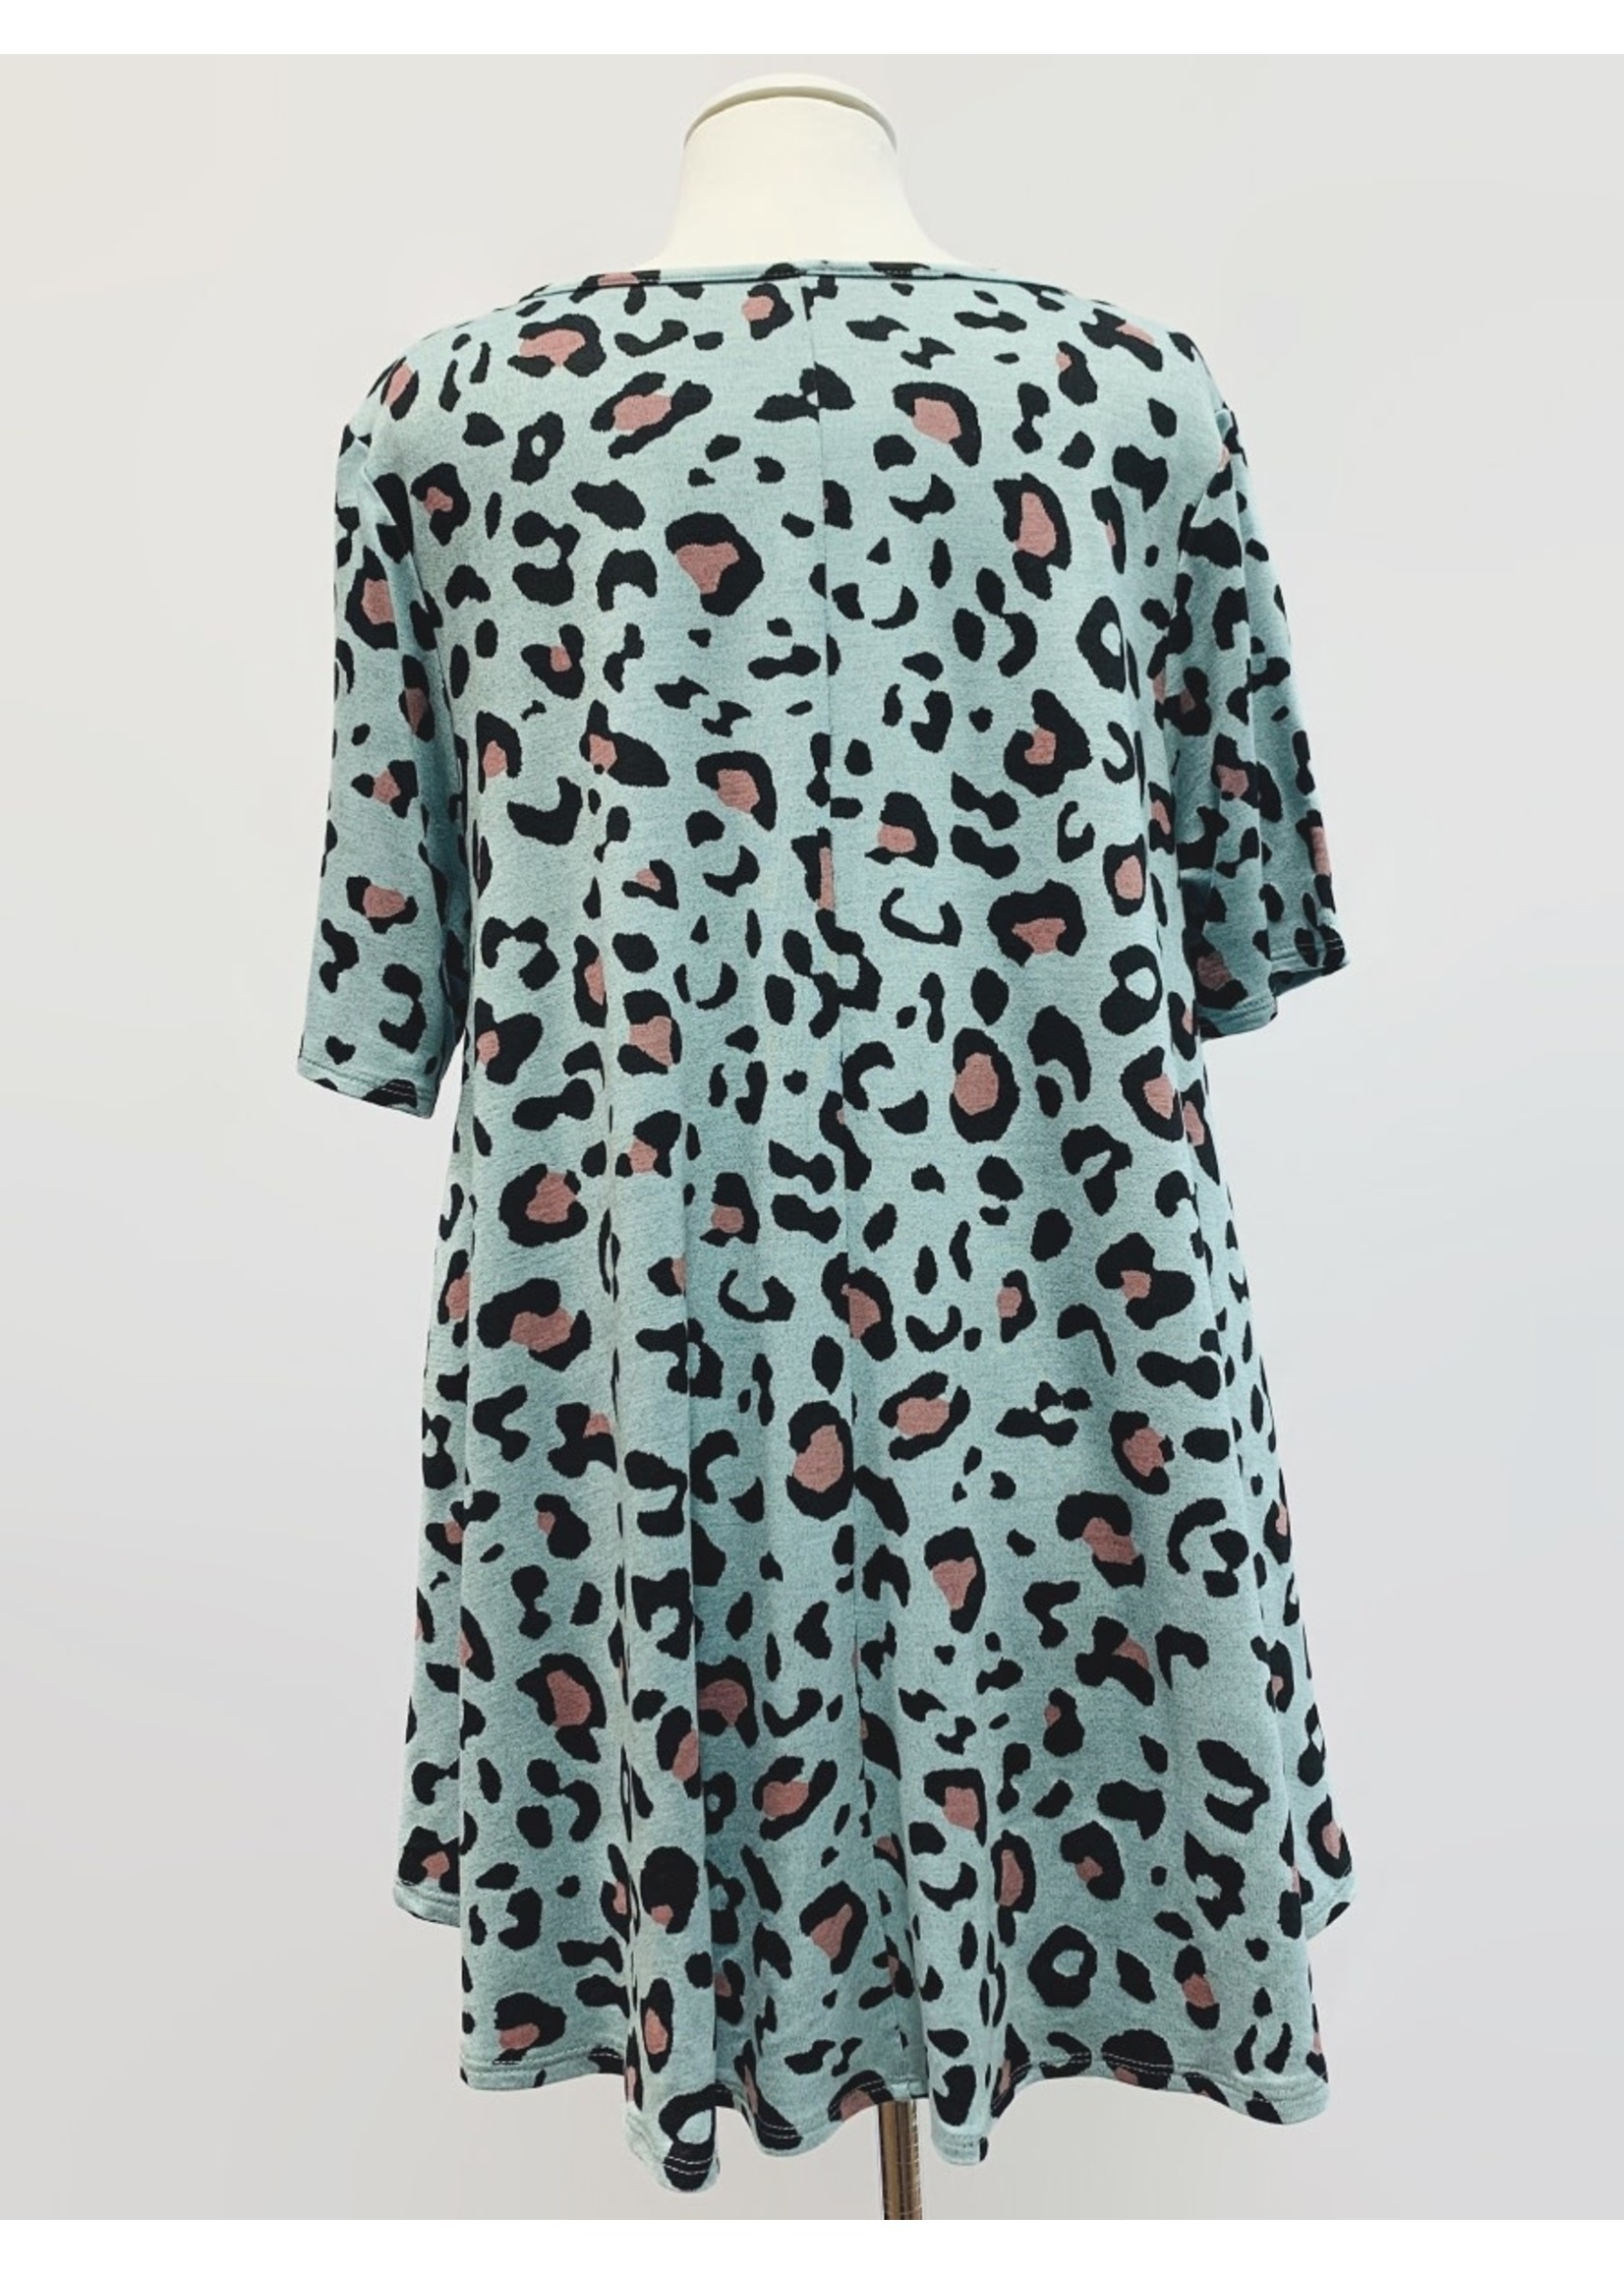 Plus Size Leopard Print Tunic Top in 2 colors